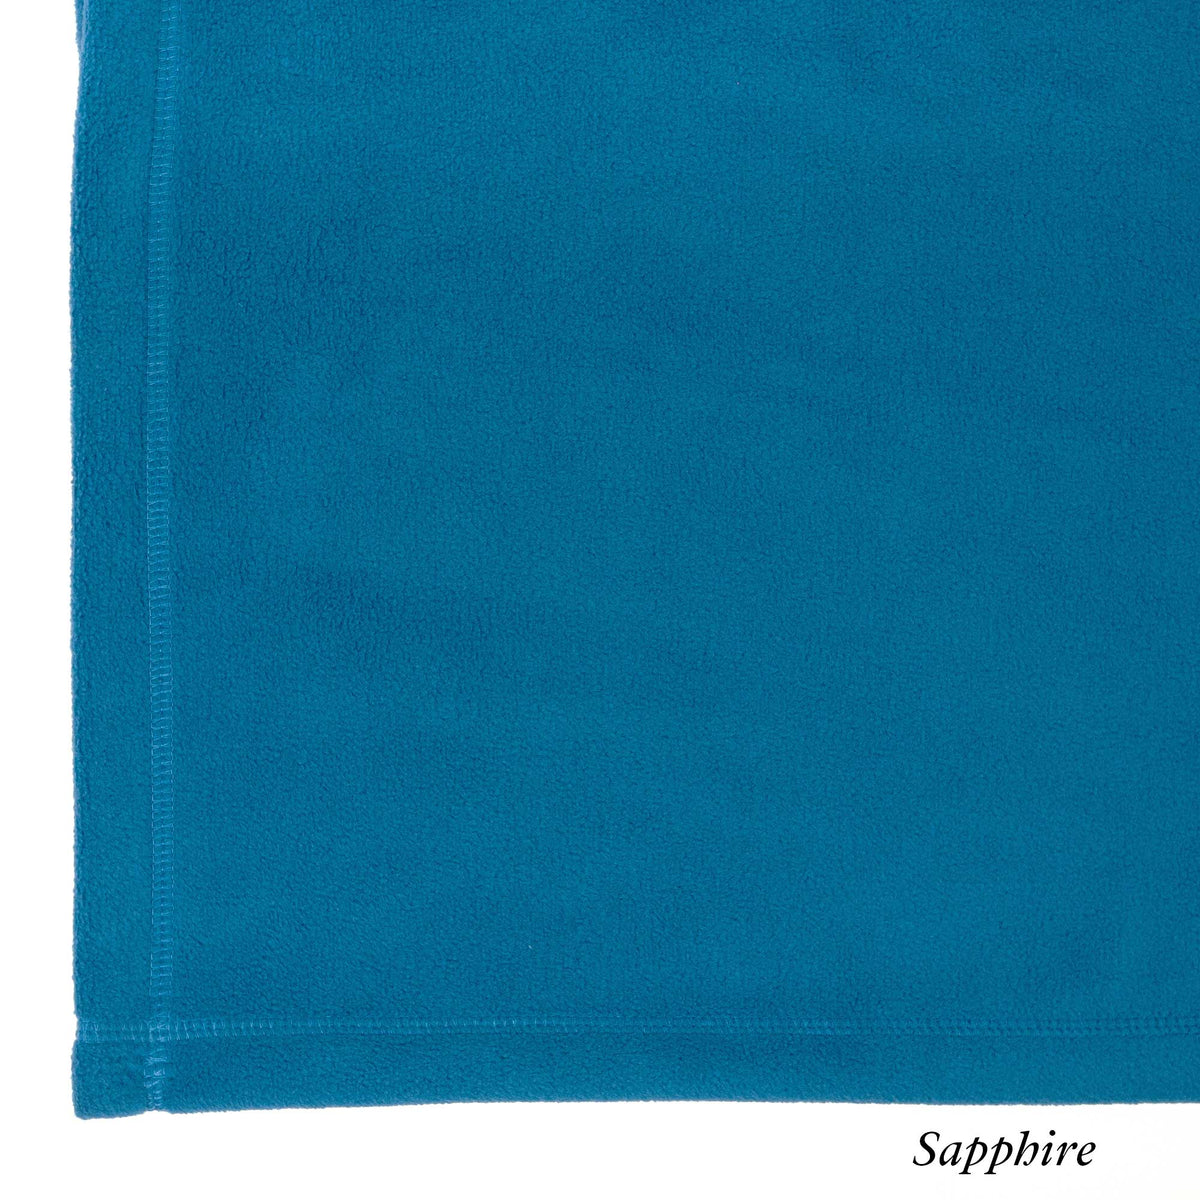 Sapphire -  Biggest Picnic Blankets - Peaceful Touch - American Blanket Company